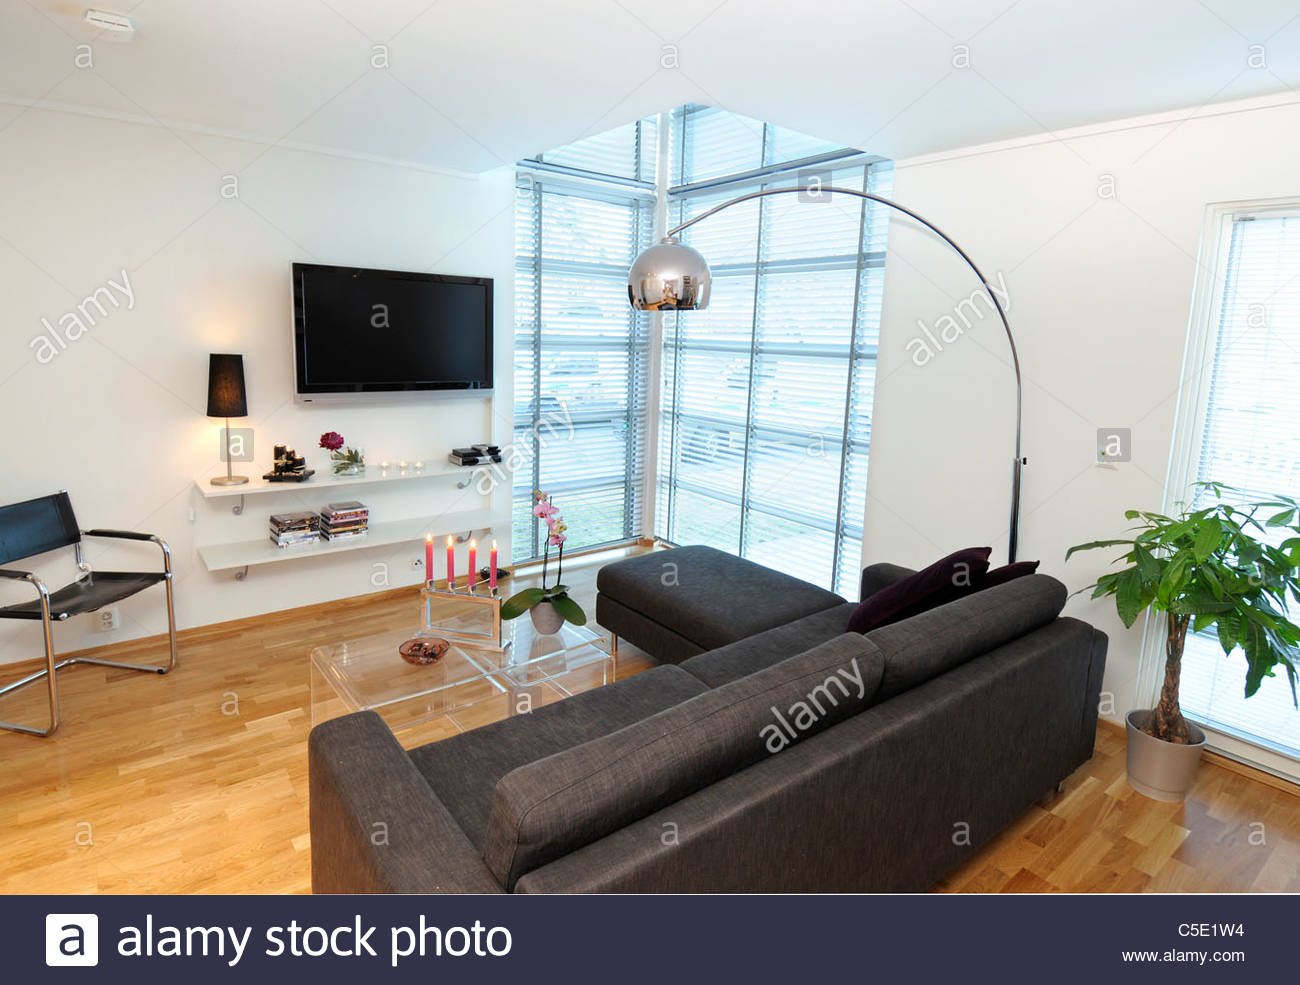 Floor Lamp Stock Photos Floor Lamp Stock Images Alamy within sizing 1300 X 985